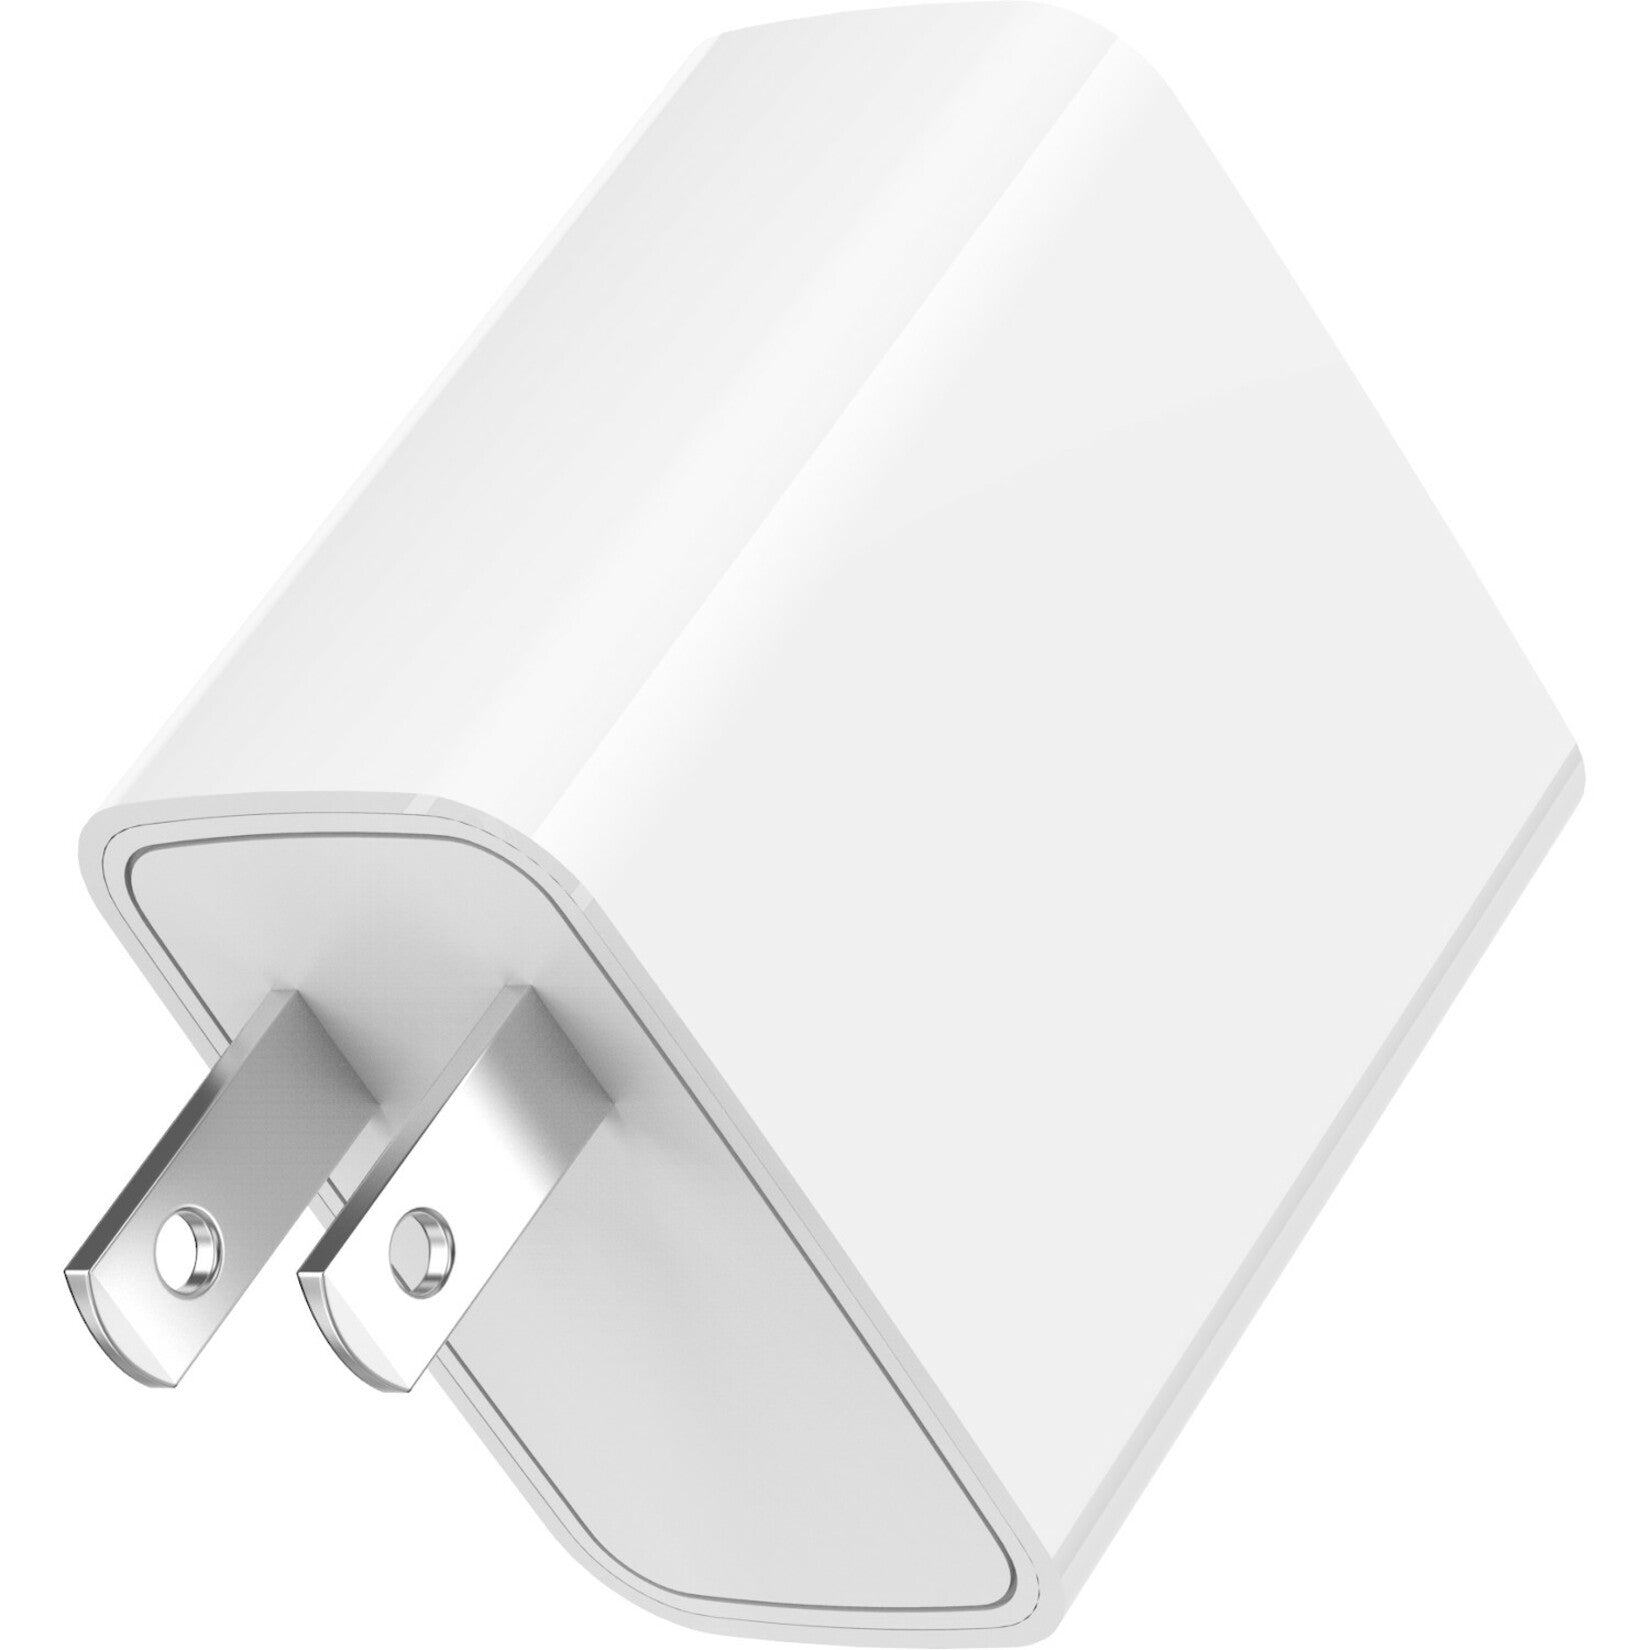 4XEM 4XRLC51120WW 20W USB-C Charger - White, Fast Charging for Your Devices